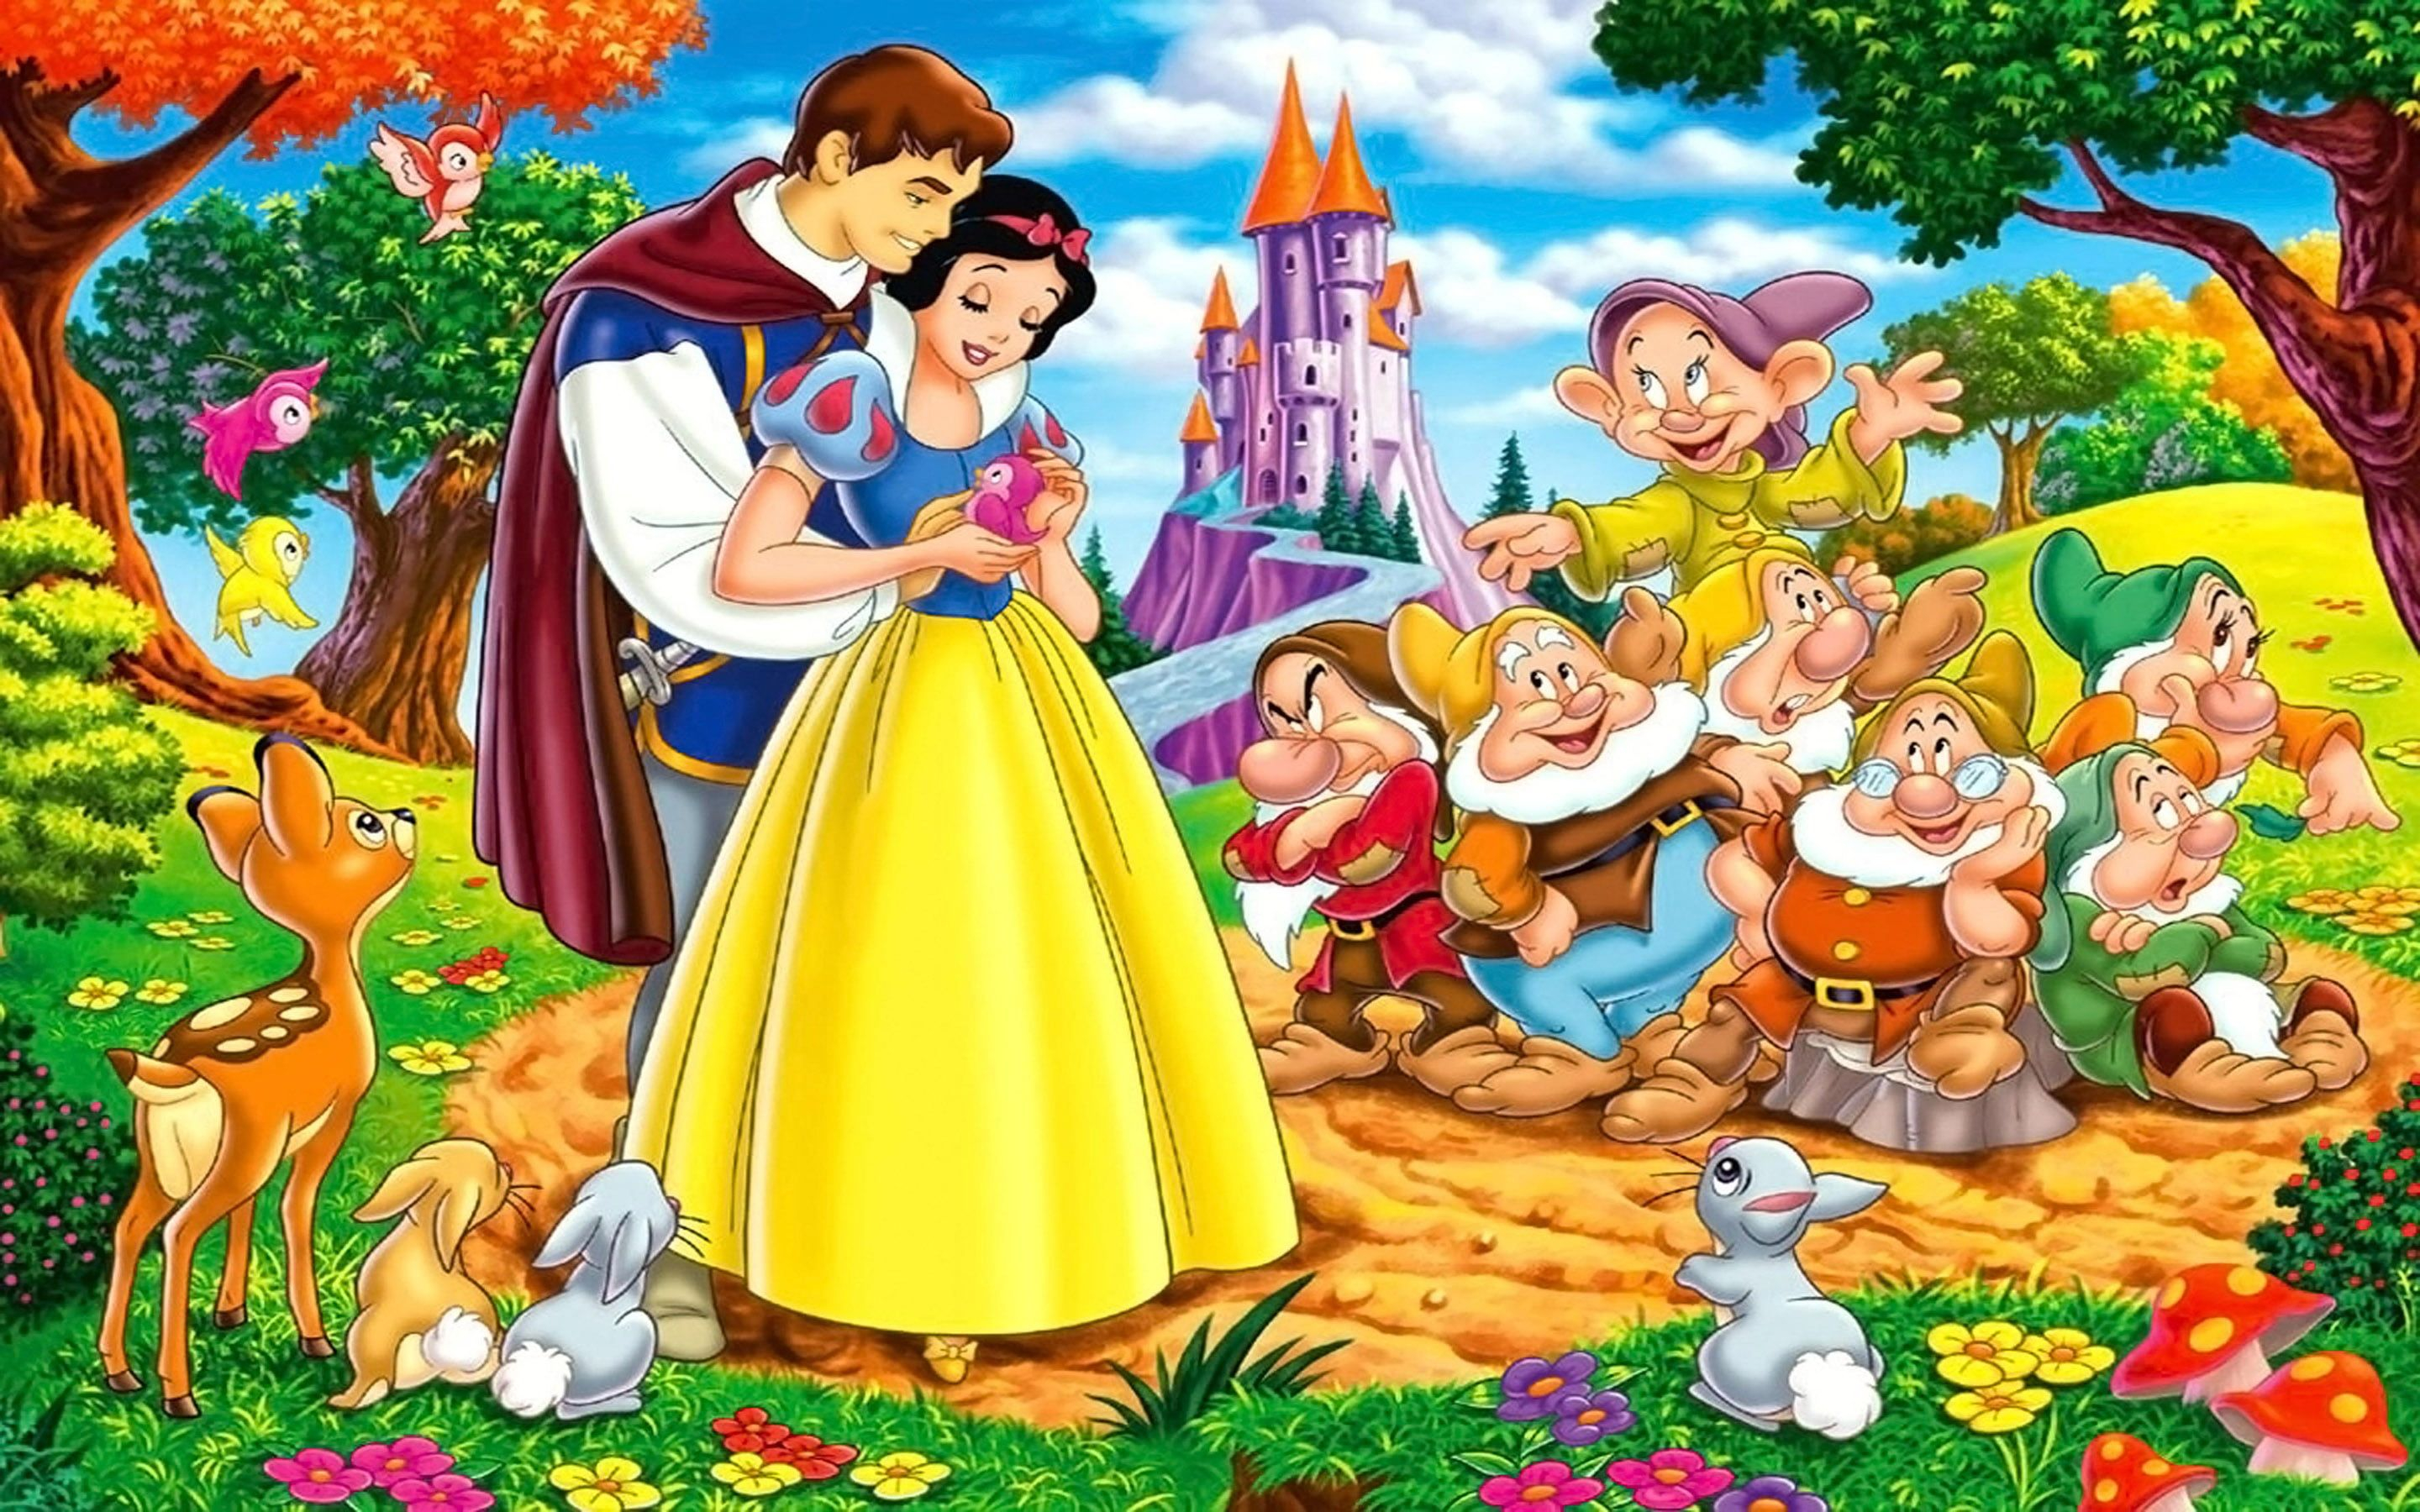 2880x1800 Snow White Prince And Seven Dwarfs Desktop Hd Wallpapers For Mobile Phones And Computer 2880&Atilde;&#151;1800 #2K #wall&acirc;&#128;&brvbar; | Snow white pictures, Snow white, Snow white wallpaper